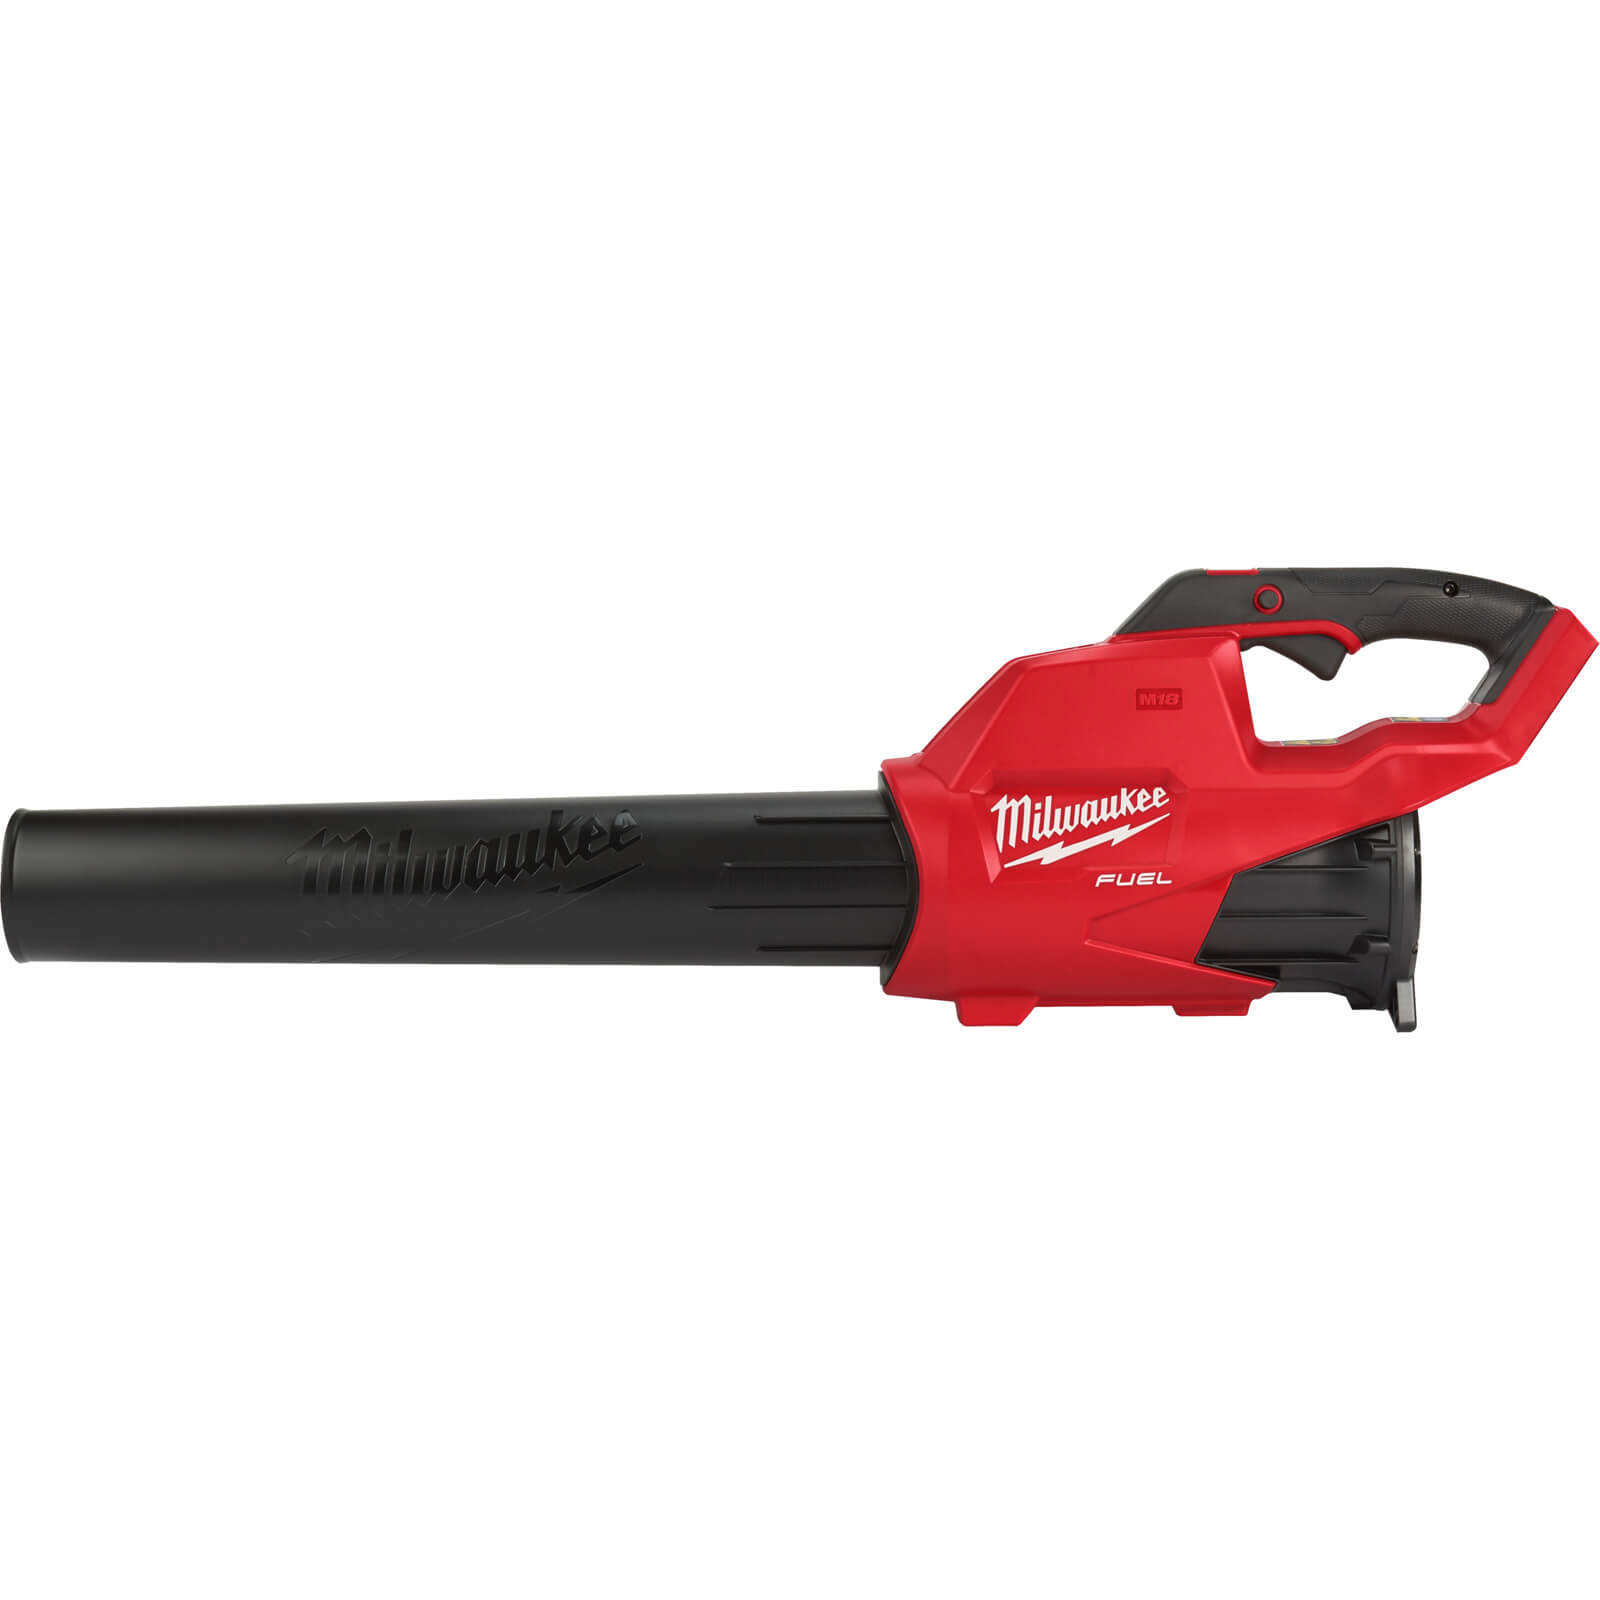 Image of Milwaukee M18 FBL Fuel 18v Cordless Brushless Garden Leaf Blower No Batteries No Charger